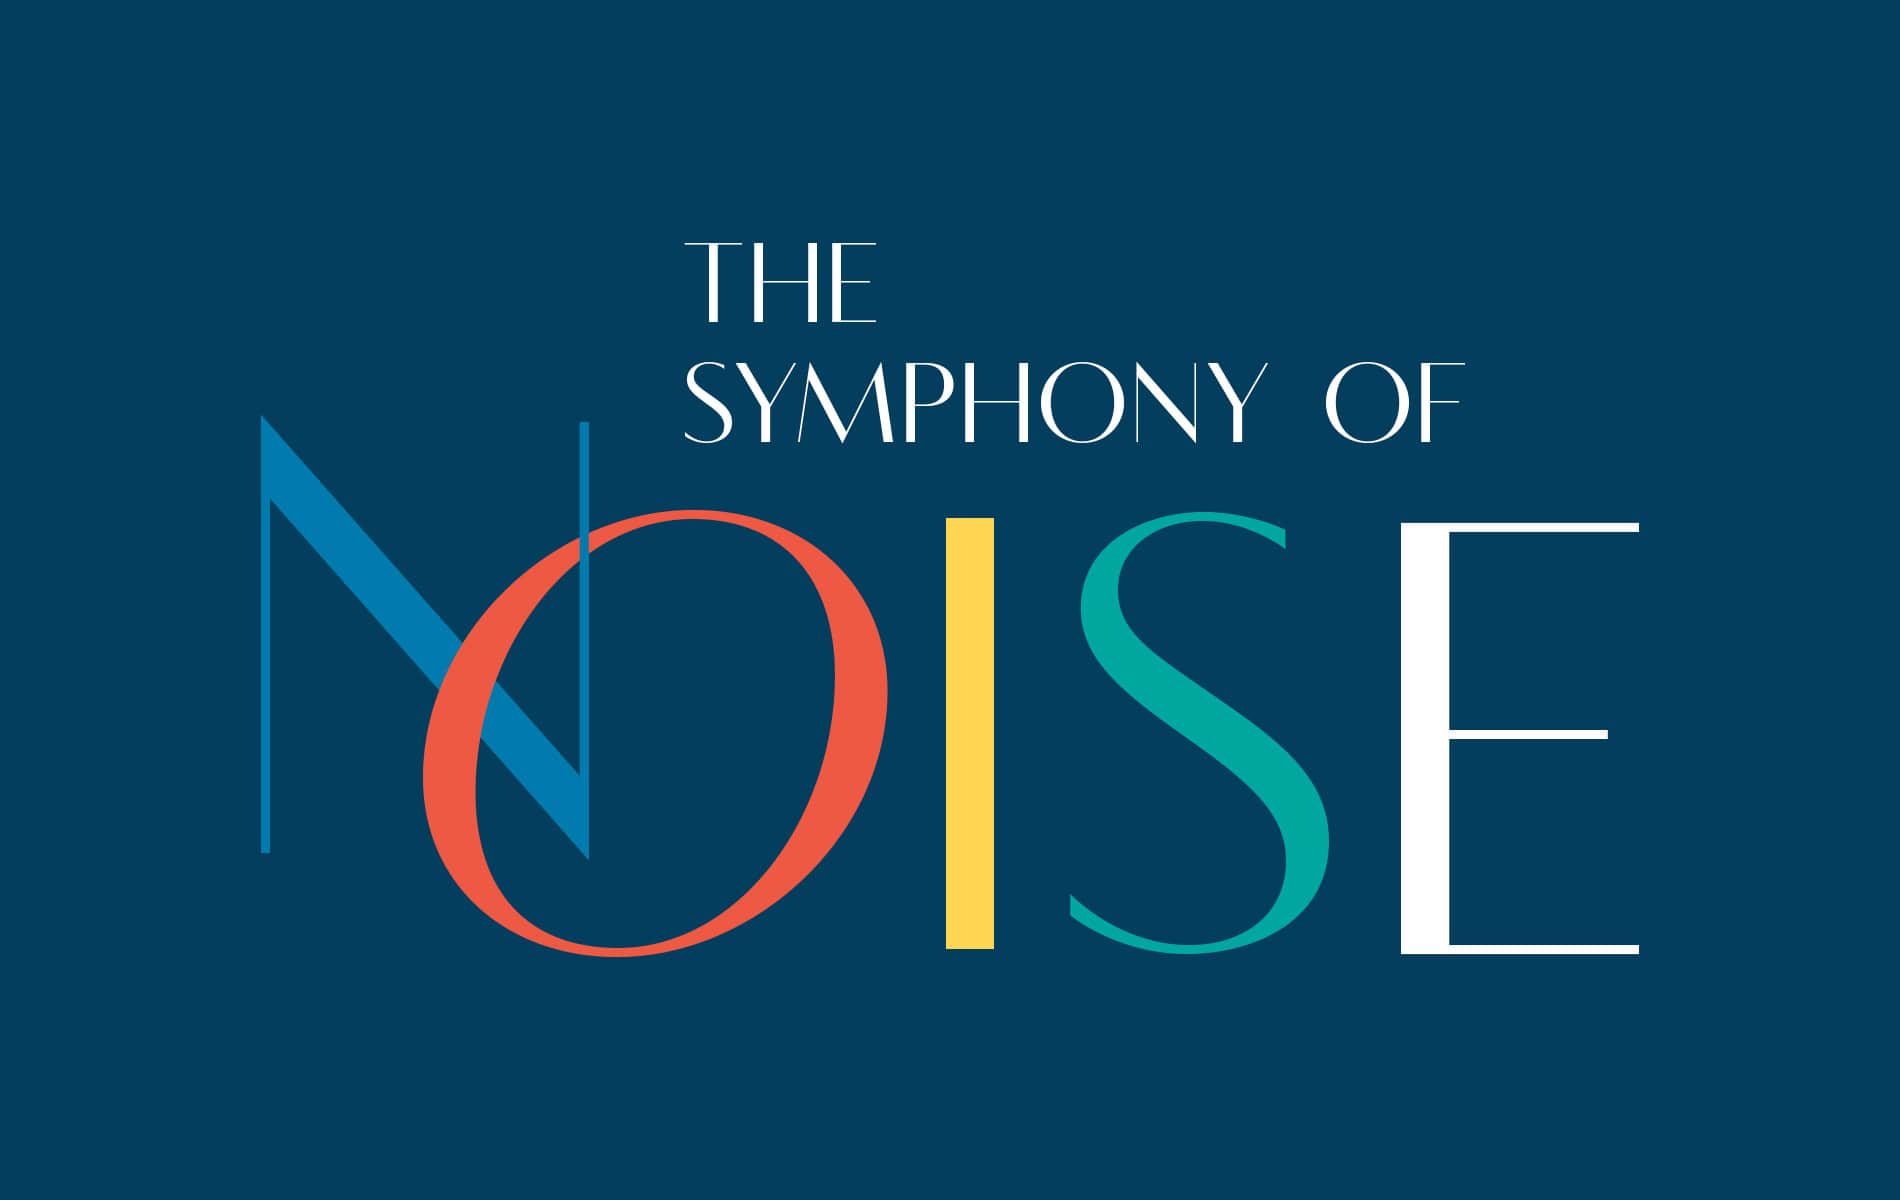 The Symphony of Noise